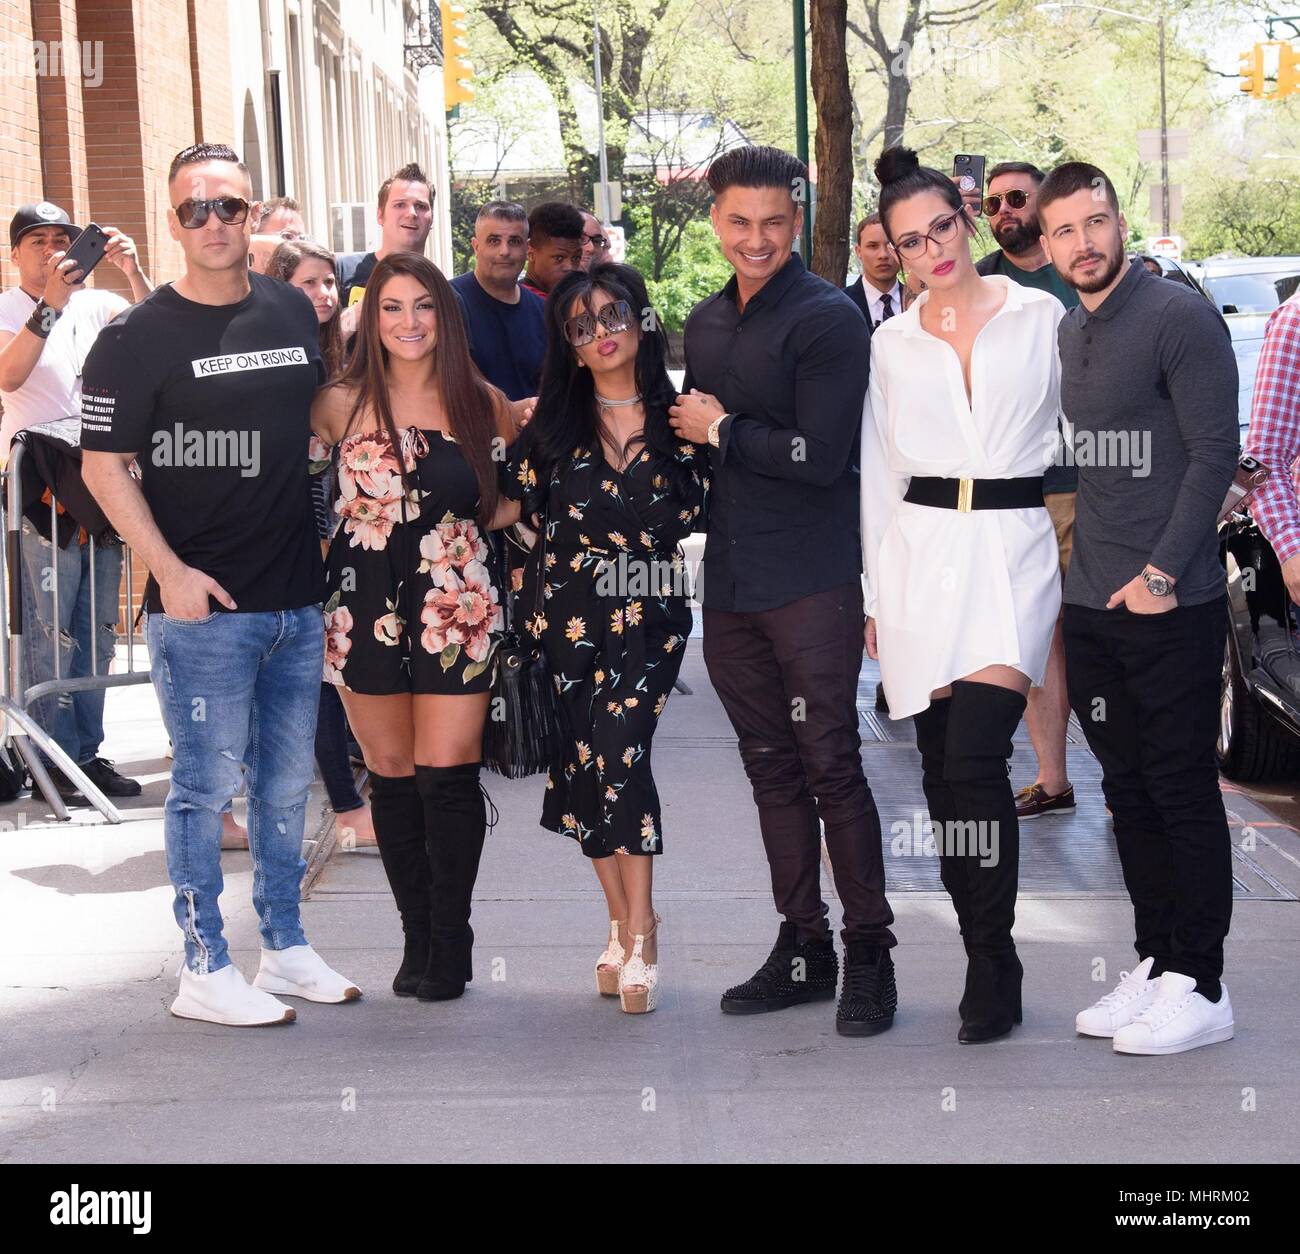 New York, NY, USA. 2nd May, 2018. Michael The Situation Sorrentino, Deena Nicole Cortese, Nicole Snooki Polizzi, Paul DelVecchio, Jenni J-Woww Farley and Vinny Guadagnino out and about for Celebrity Candids - WED, New York, NY May 2, 2018. Credit: RCF/Everett Collection/Alamy Live News Stock Photo